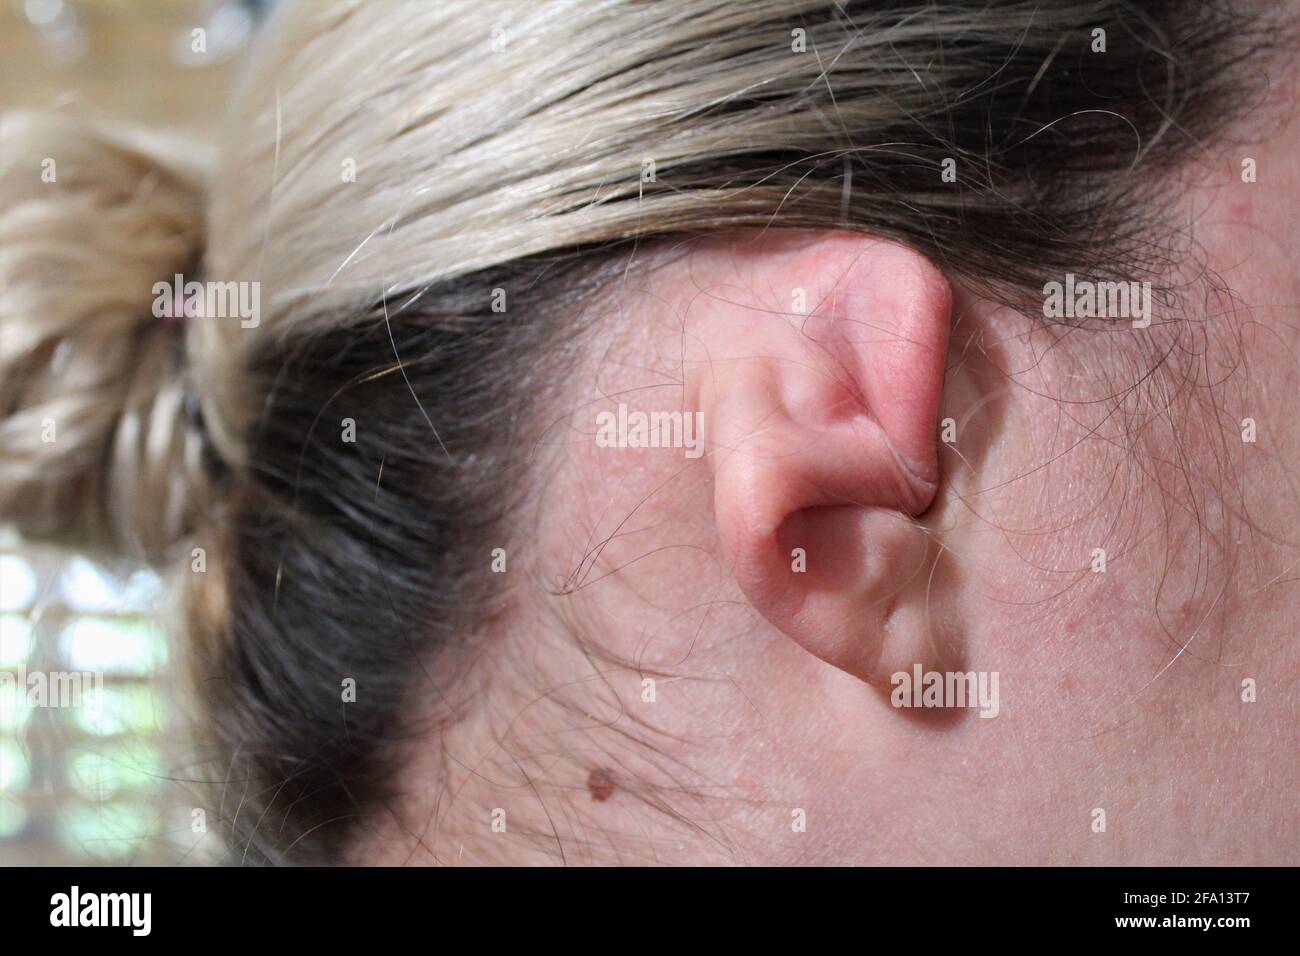 Cauliflower Ear High Resolution Stock Photography and Images - Alamy